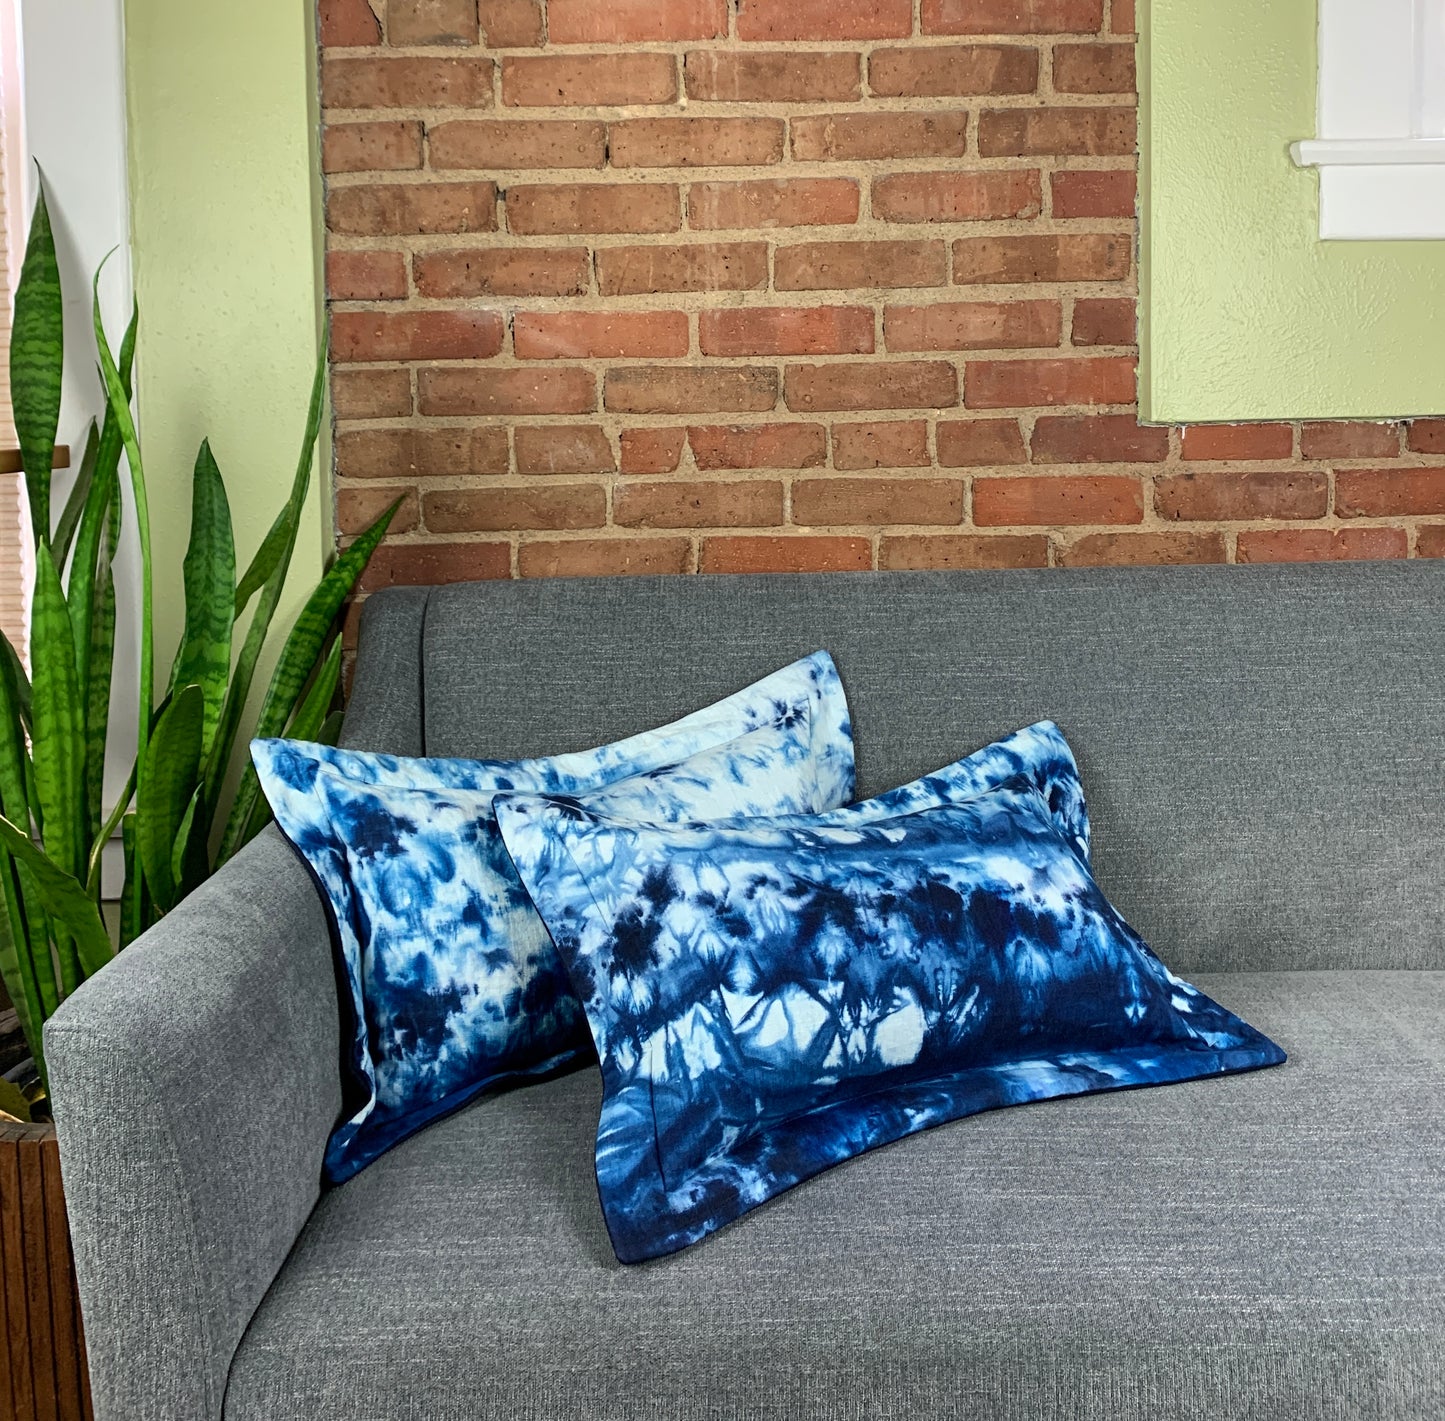 Art Pillow: Blue Stained Glass